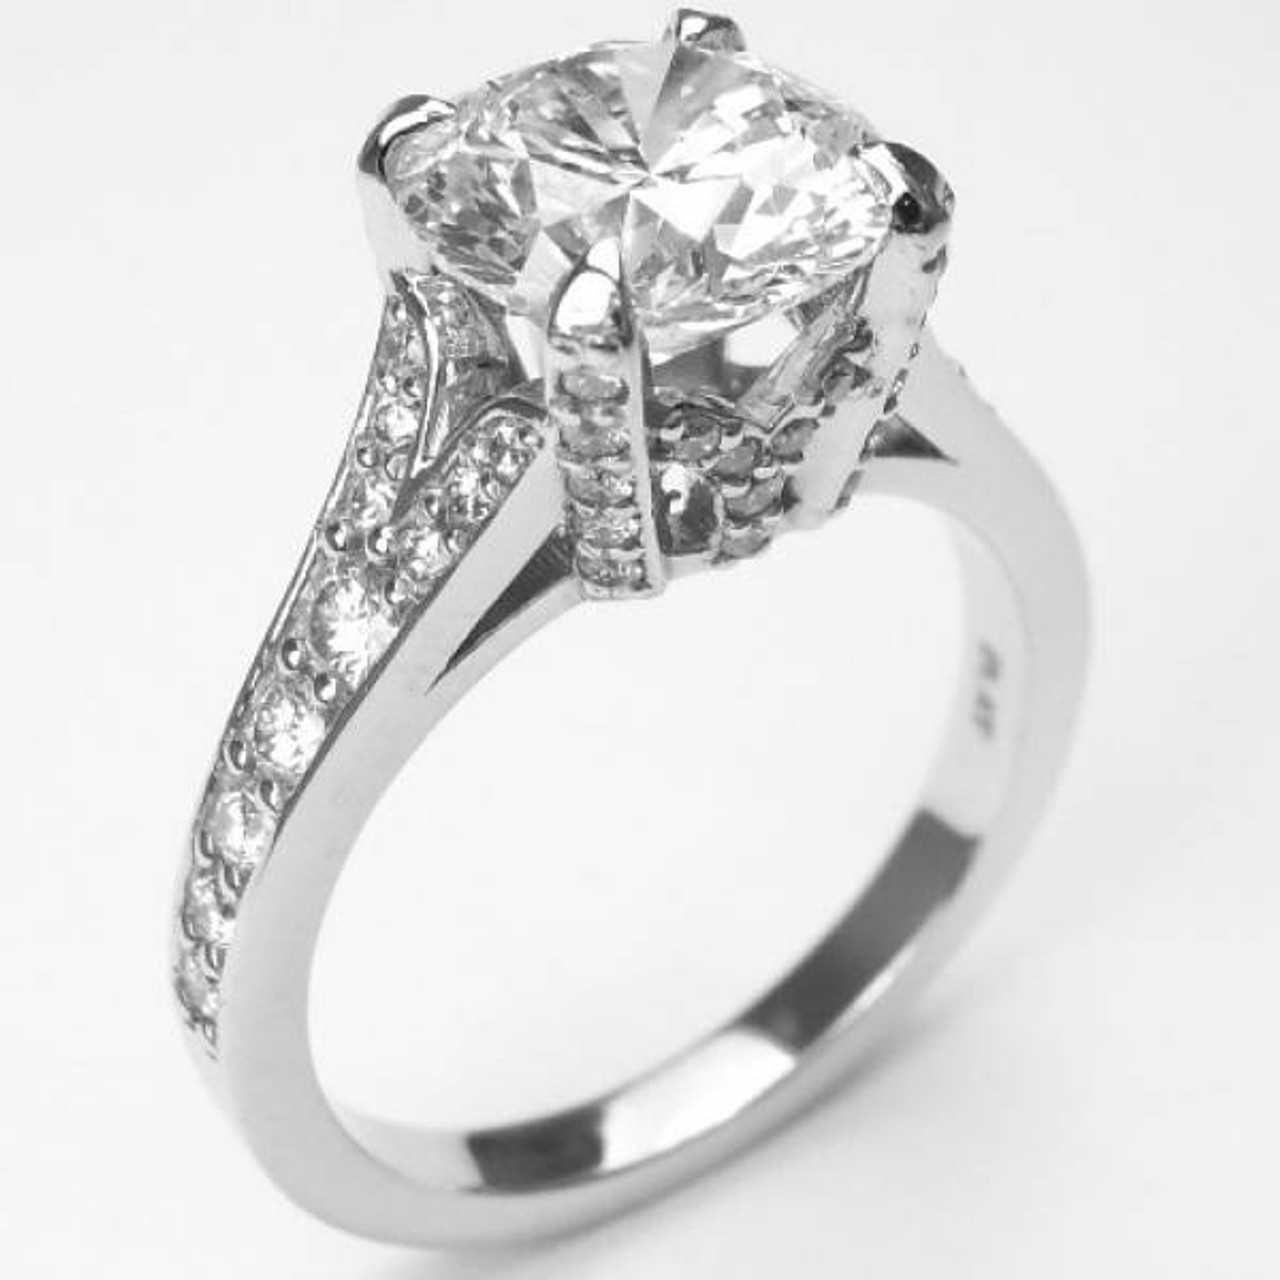 Eagle claw, crown setting solitaire. Diamonds in platinum